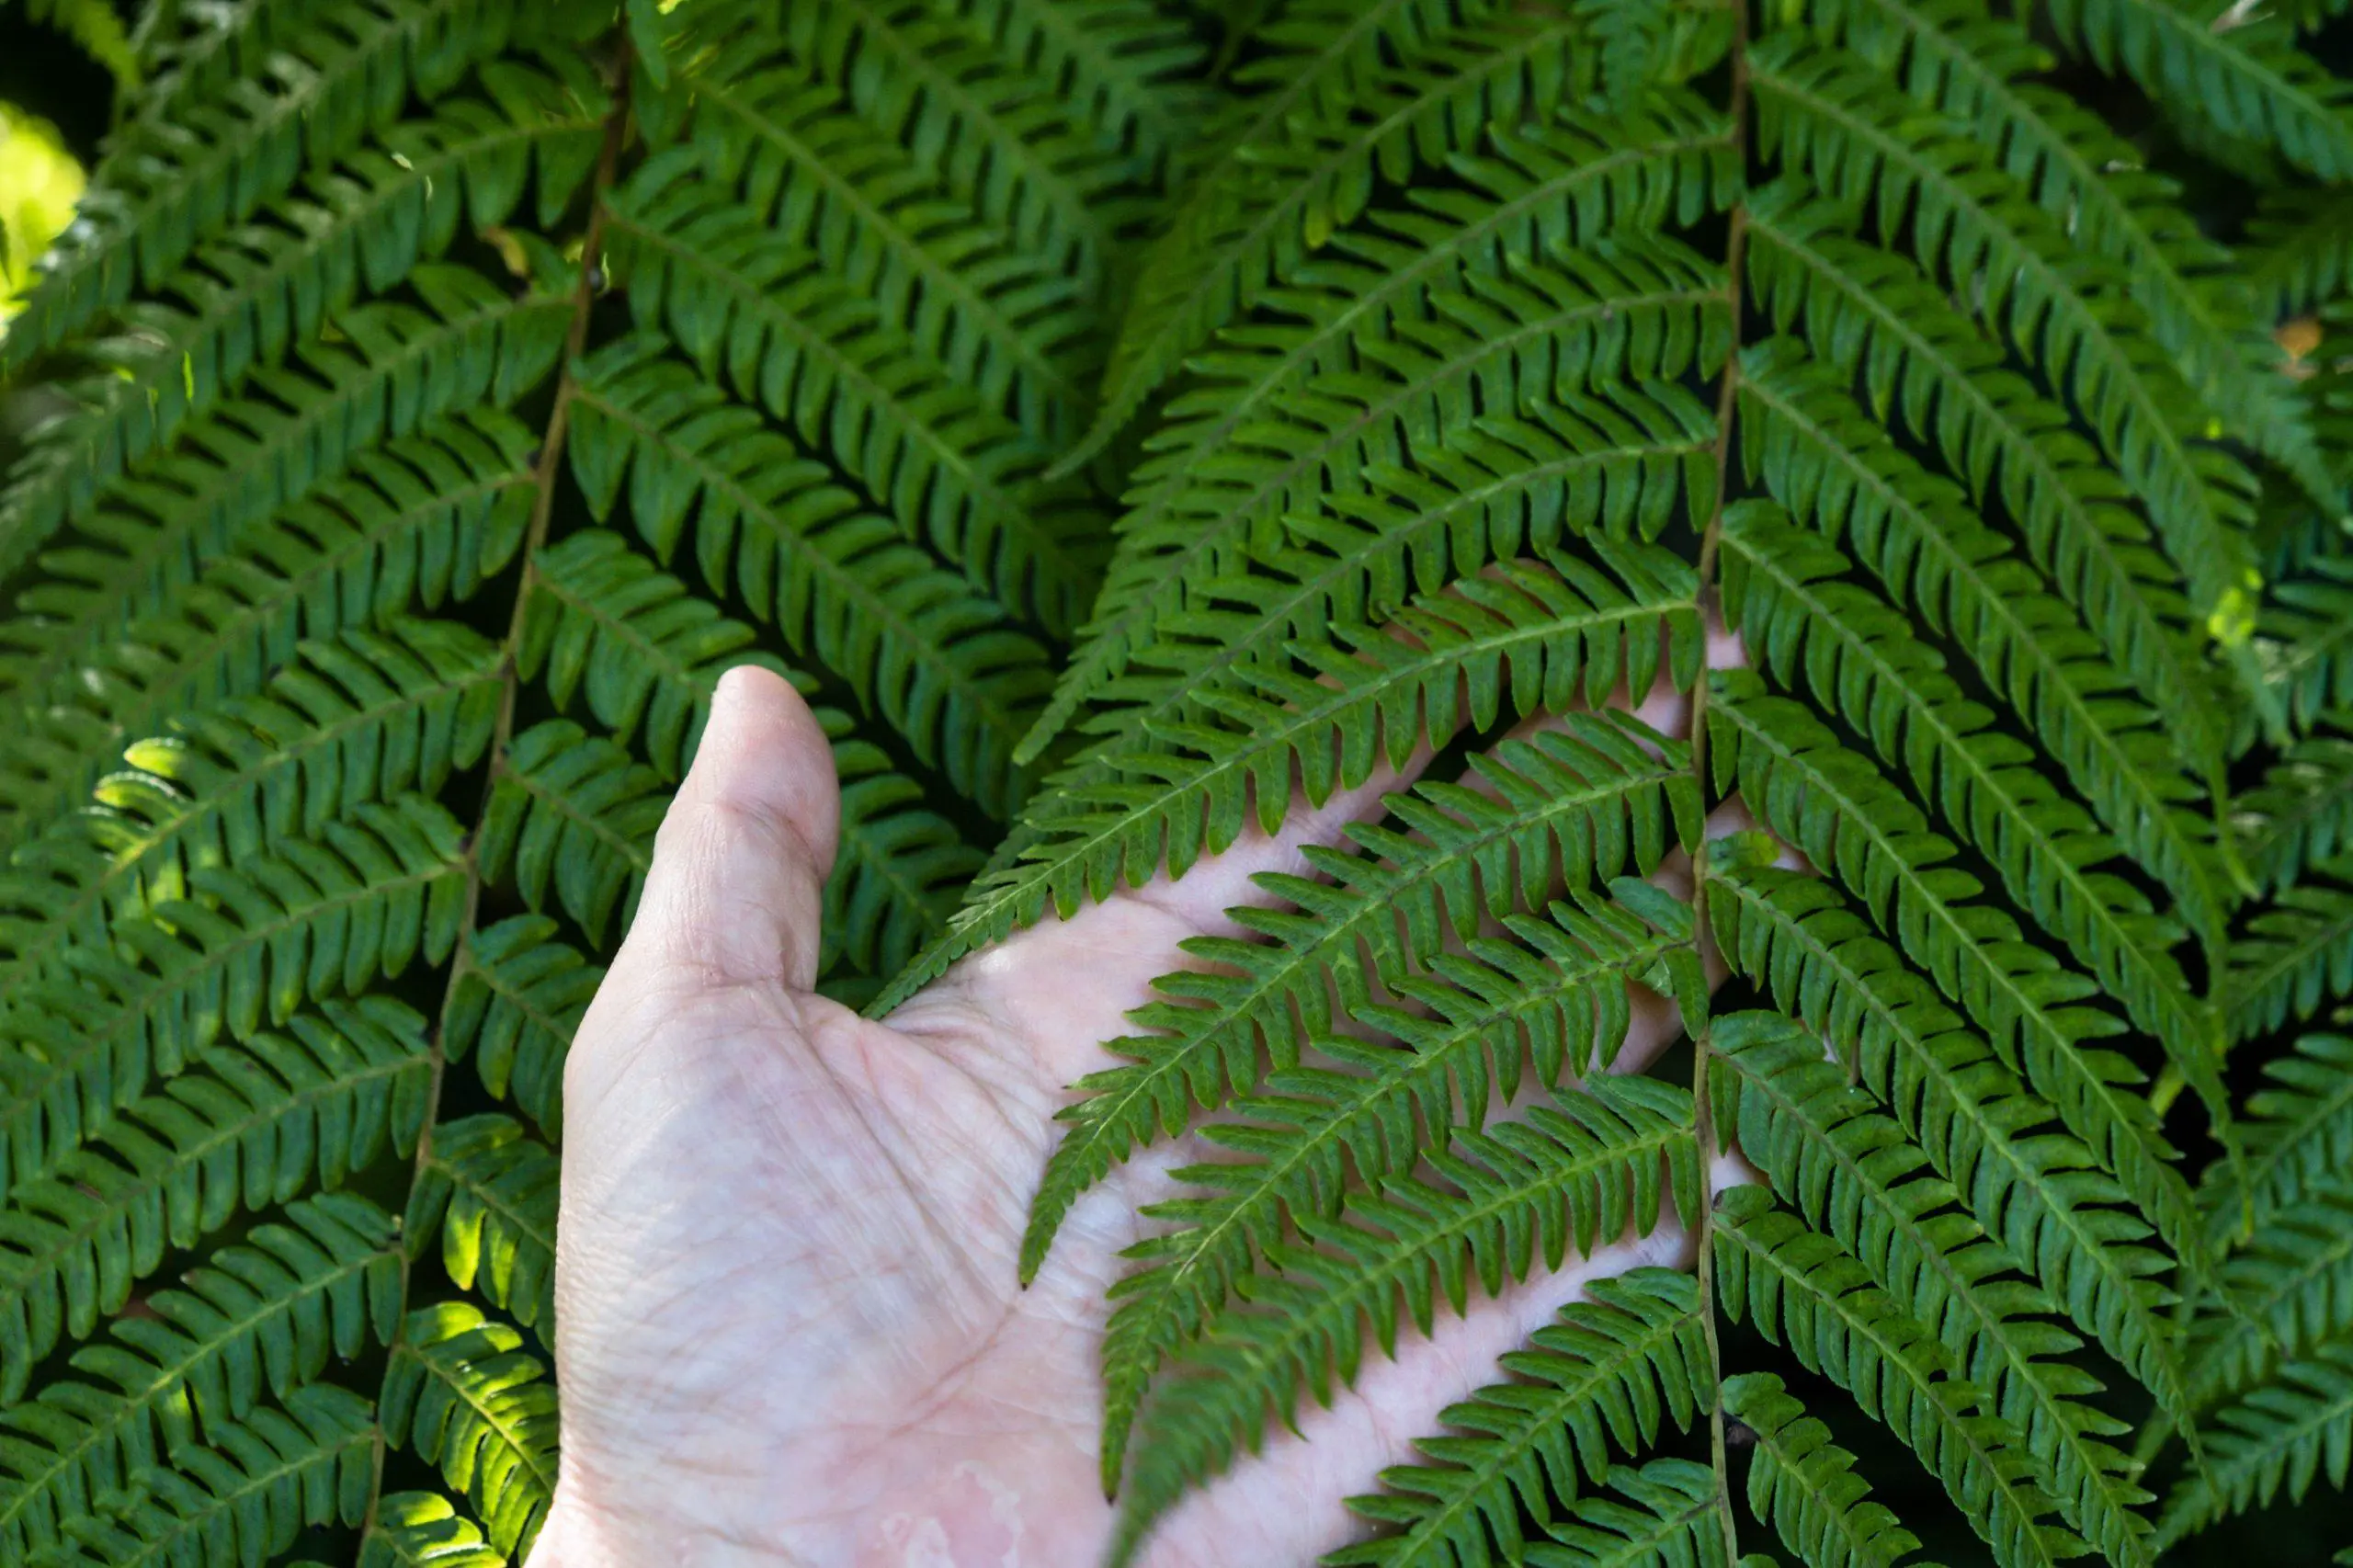 Hand touching ferns without any protection